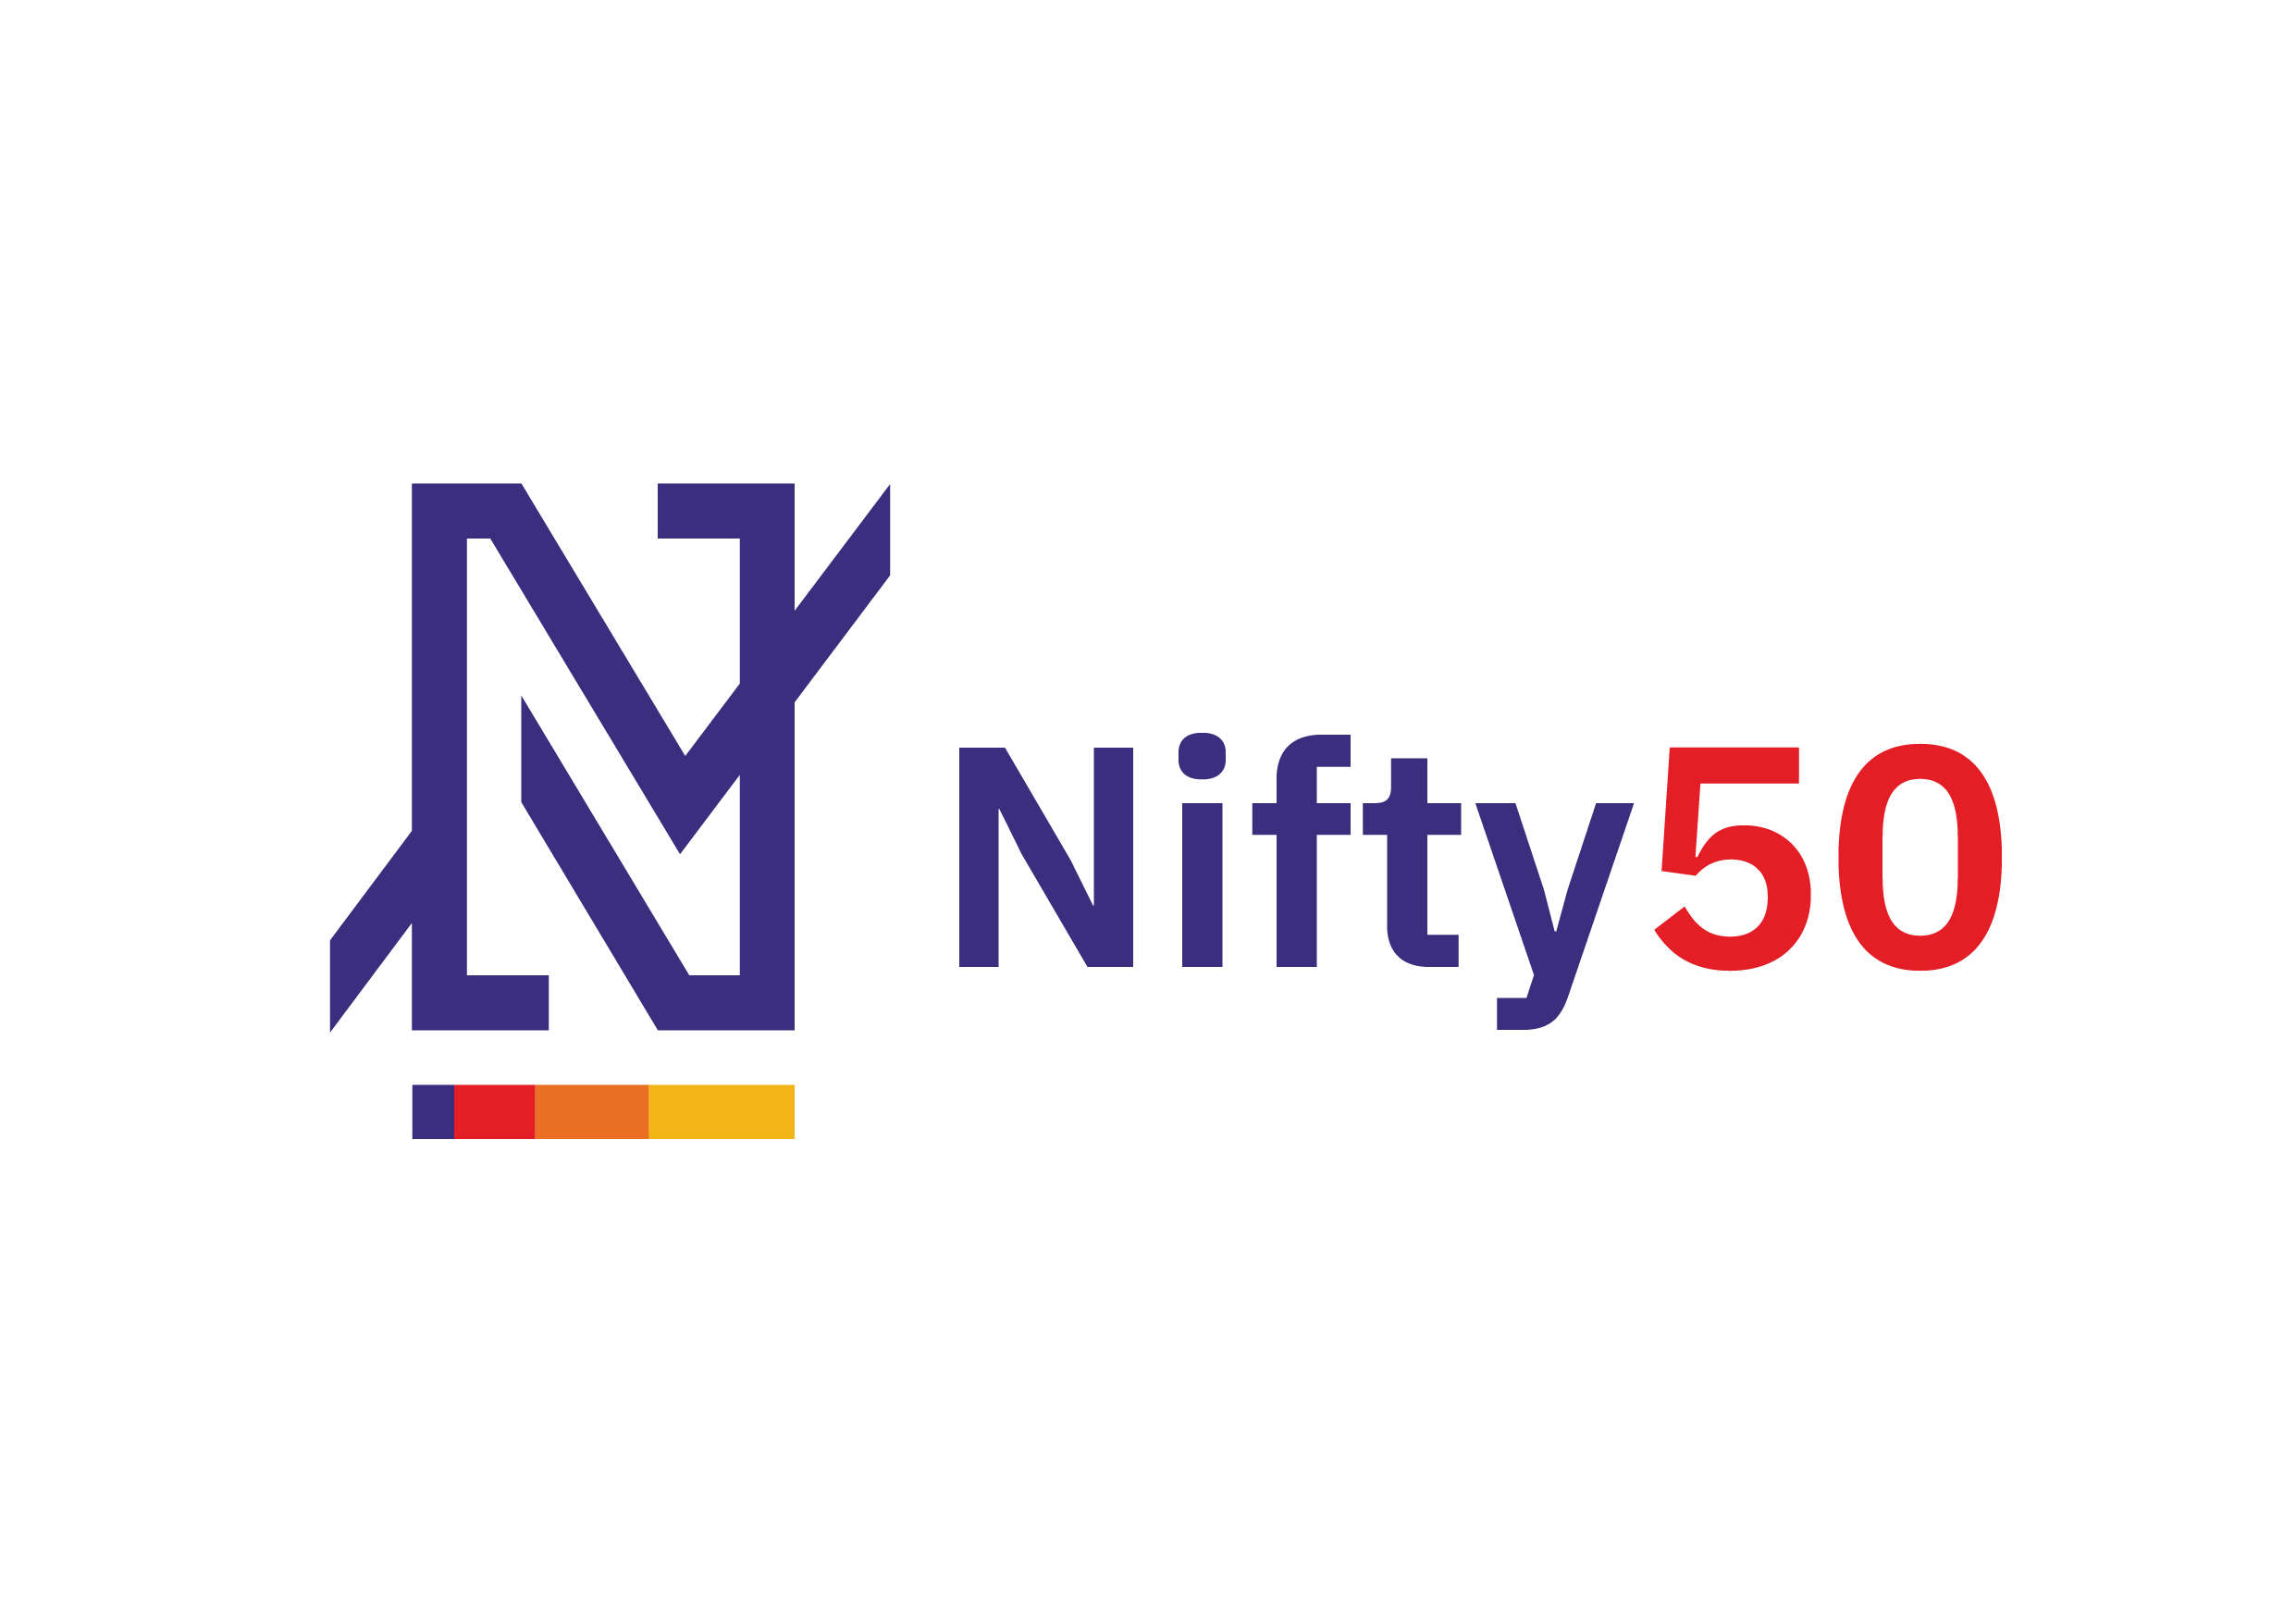 Nifty50 Nse Unveils New Brand Identity For Nifty50 The Economic Times